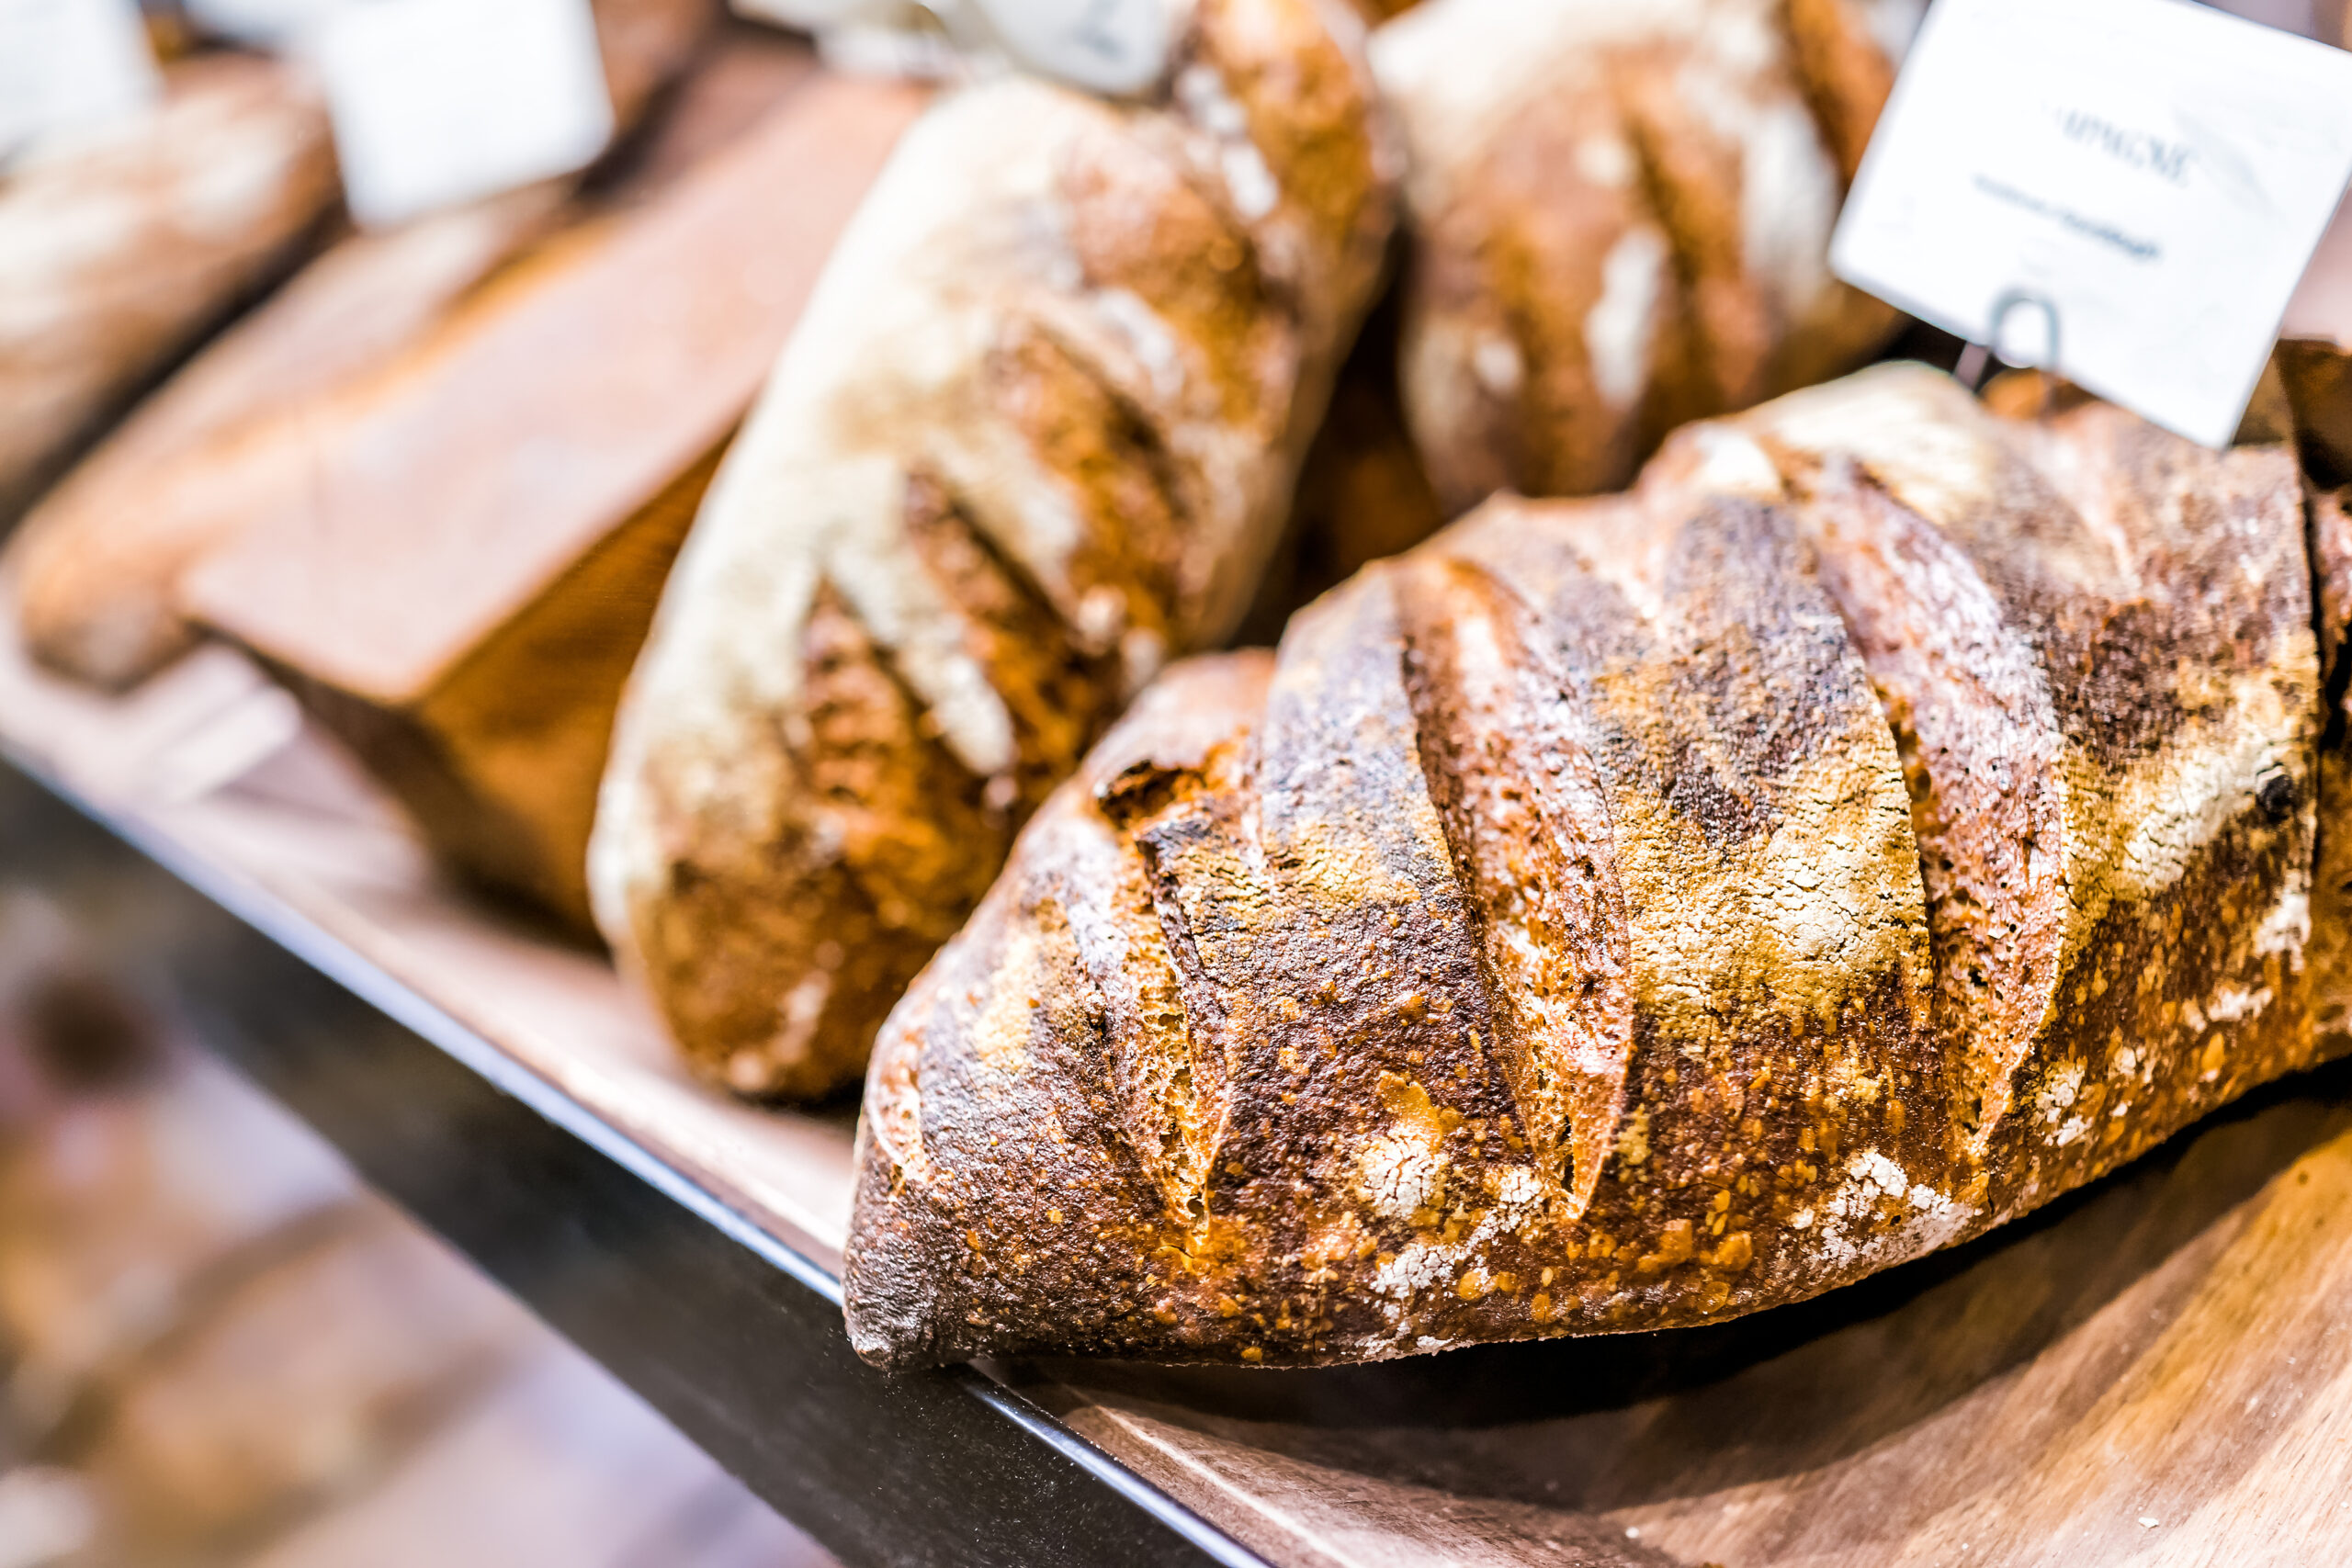 Bread is an example of a product which uses emulsifiers.